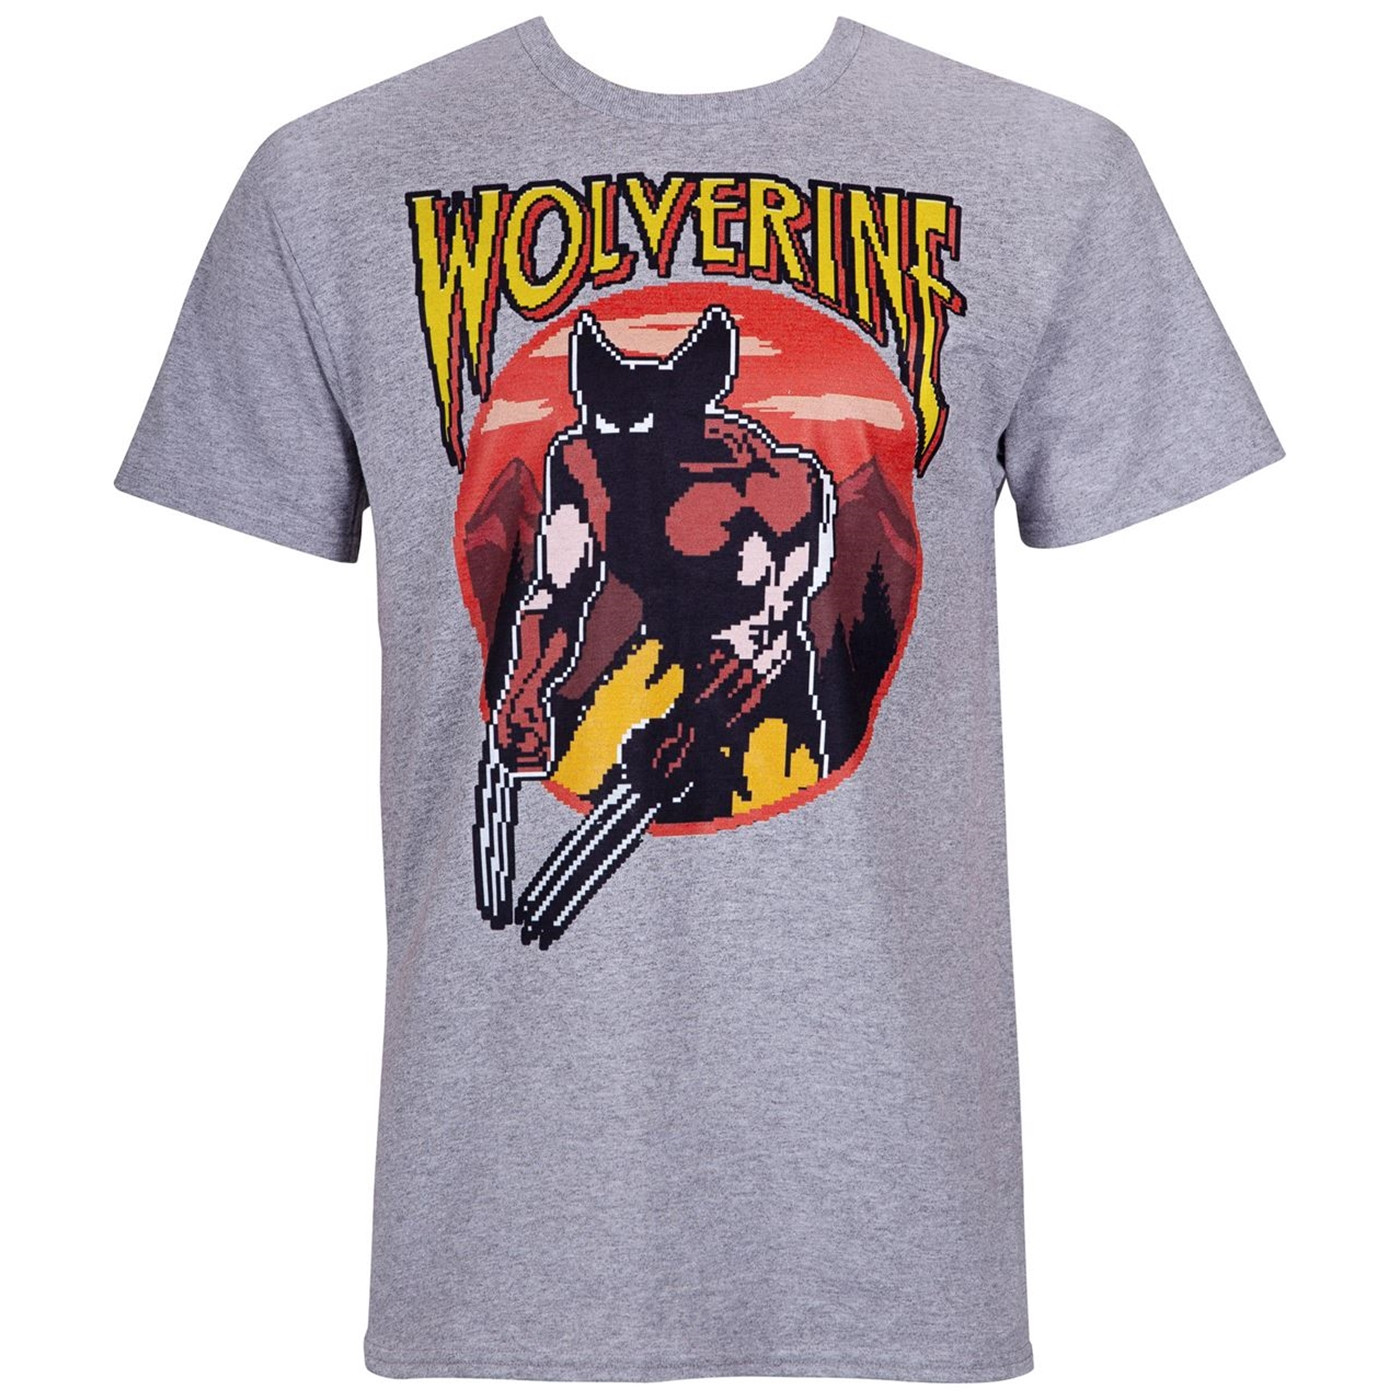 Wolverine Character Arcade Style Men's T-Shirt